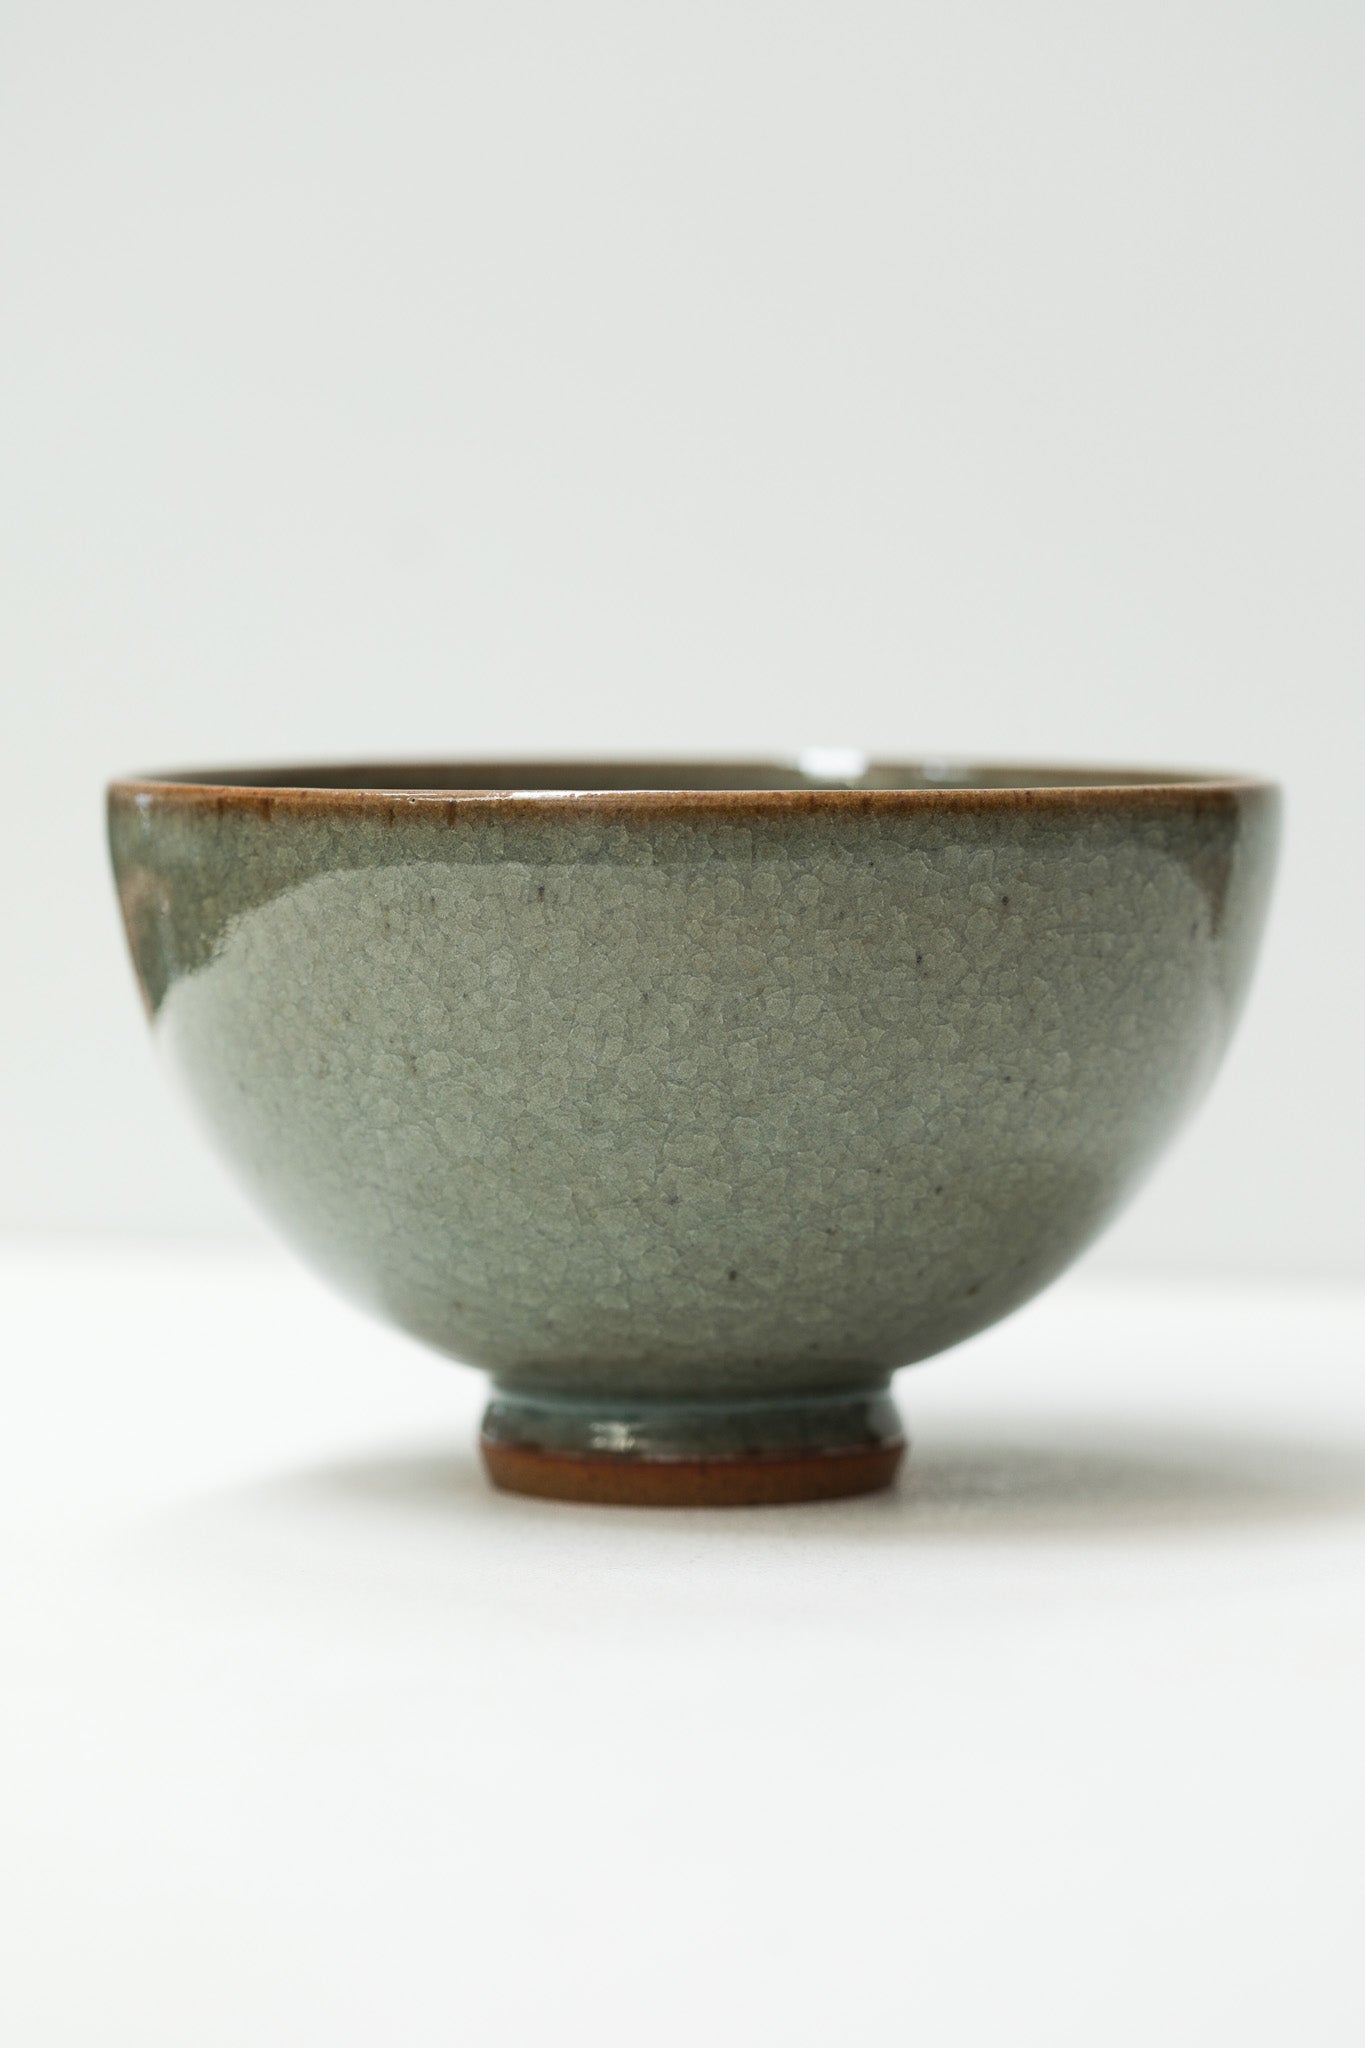 Florian Gadsby: Rounded Bowl